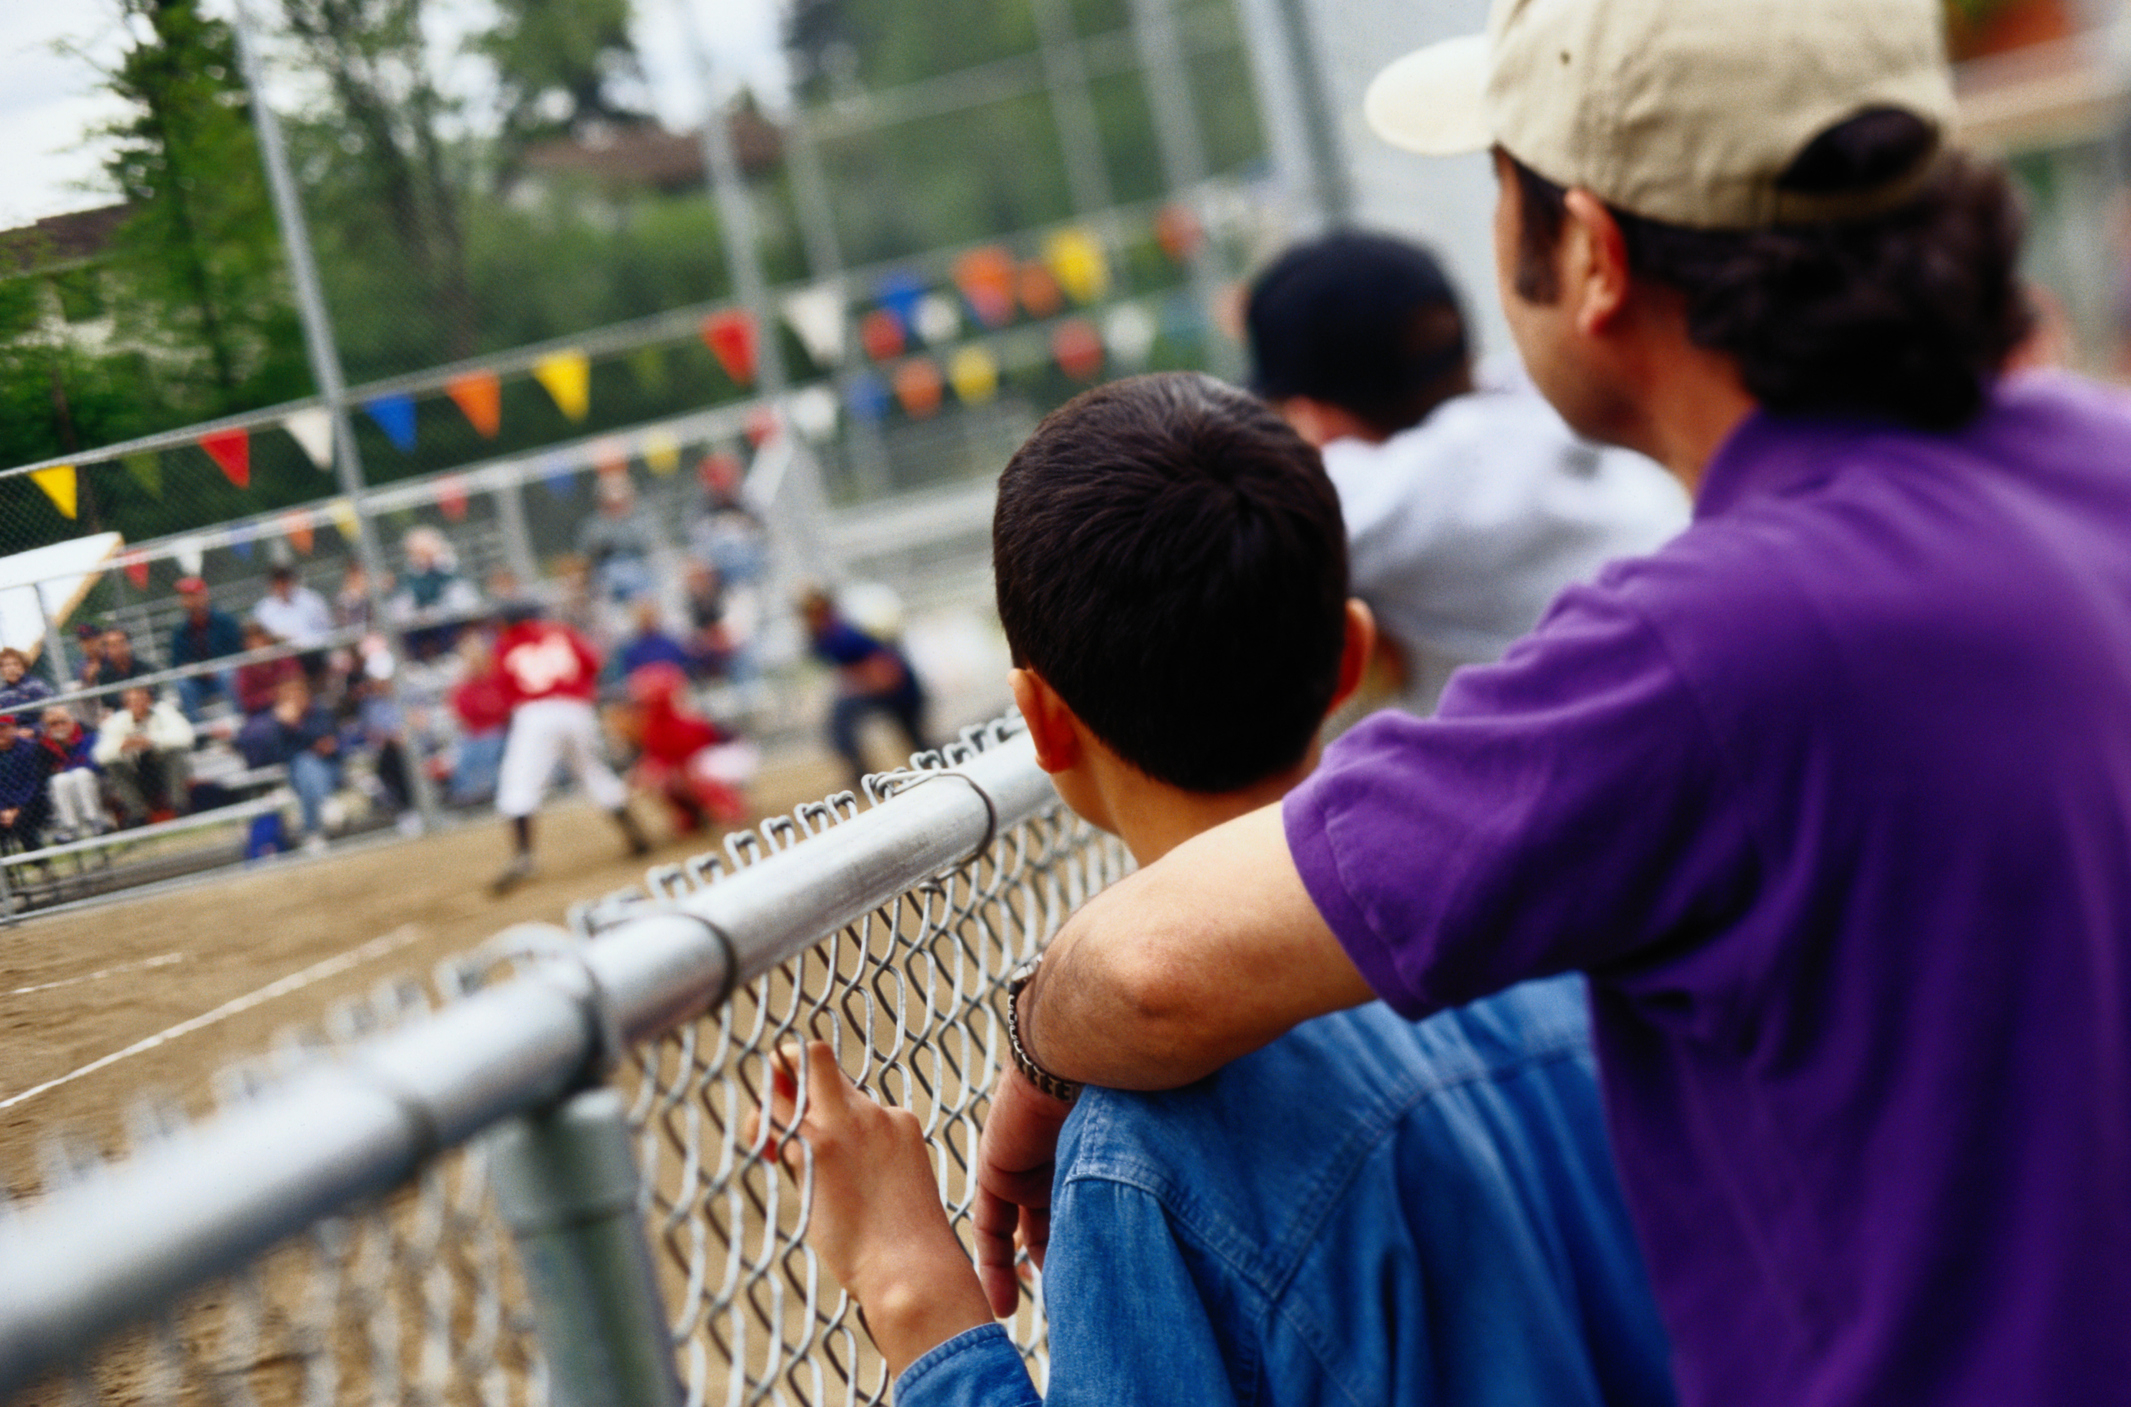 A father and his son are watching a baseball game